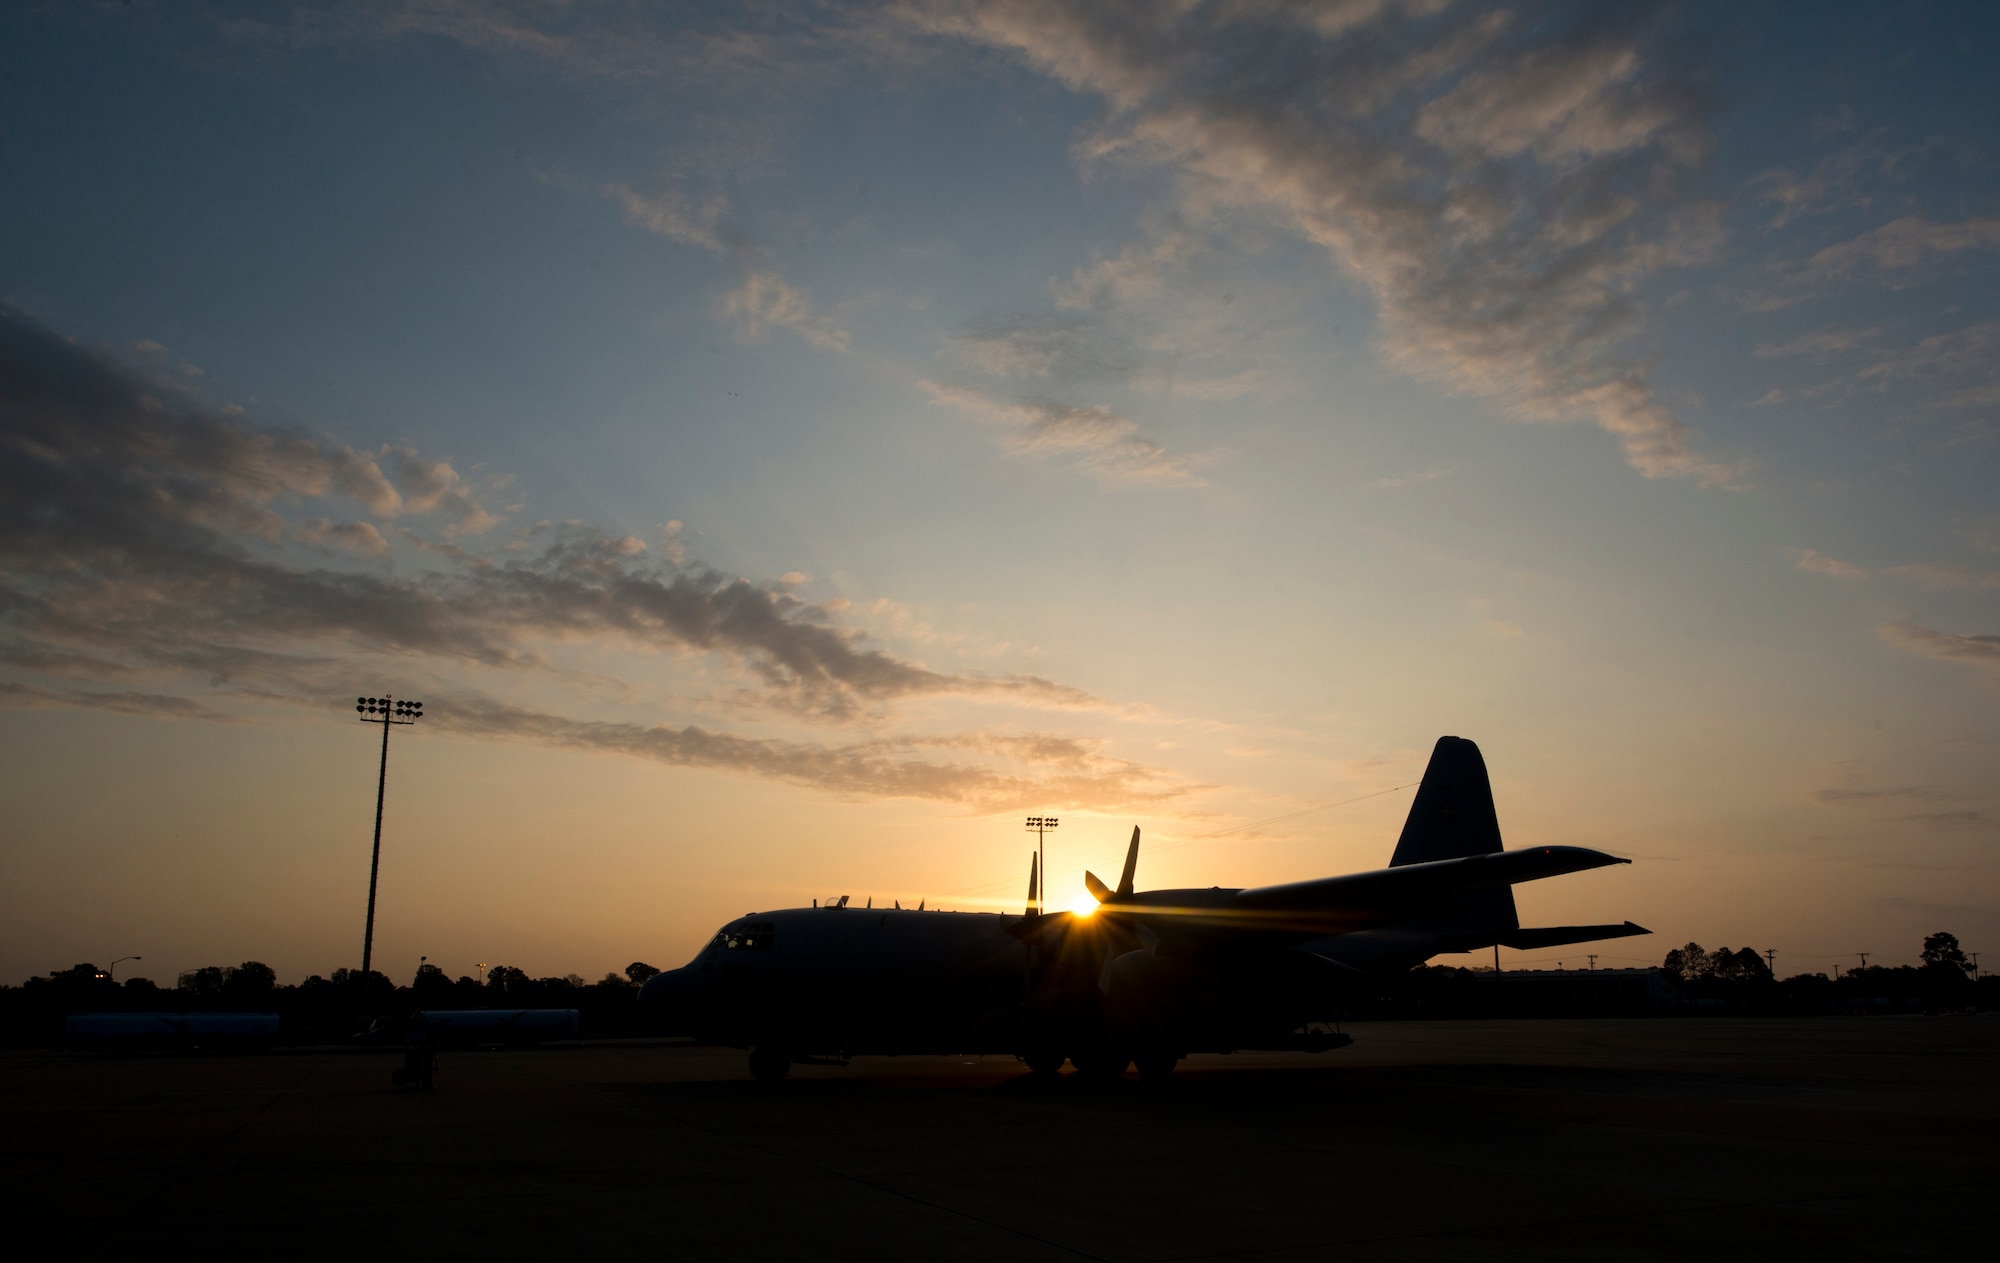 A C-130 Hercules sits on the ramp at sunrise during a Joint Readiness Training exercise at Alexandria International Airport, La. April 17, 2016. JRTC is a multinational exercise focused on pre-deployment and airdrop capabilities. (U.S. Air Force photo by Senior Airman Joshua King)